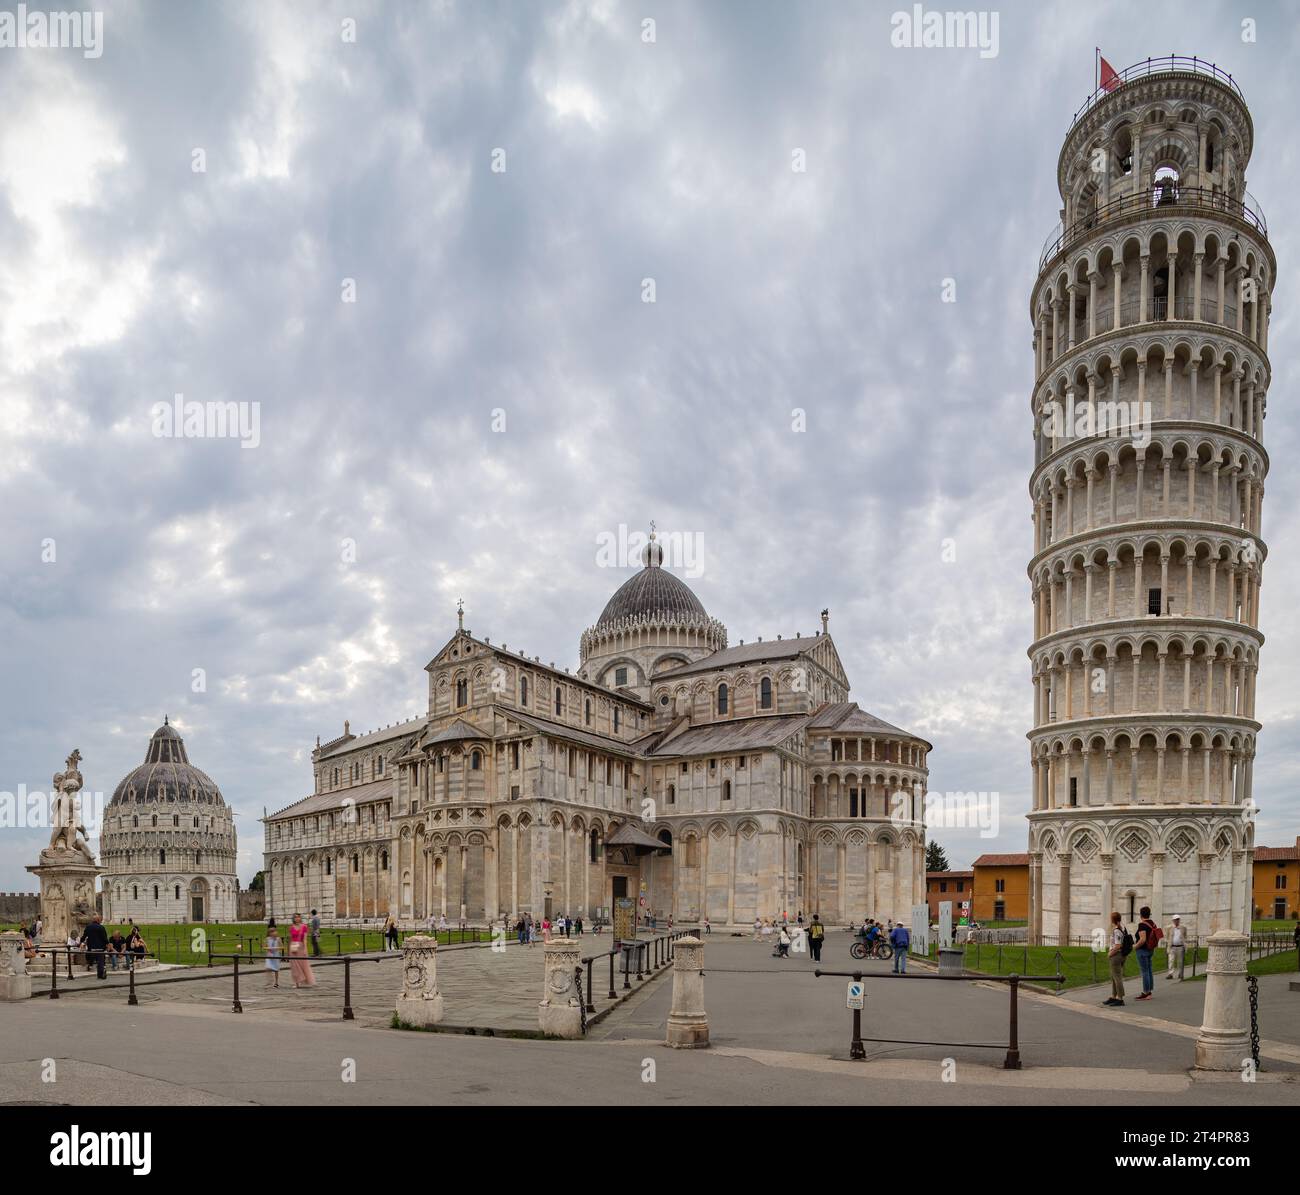 The beautiful Piazza dei Miracoli with the leaning tower, Pisa, Italy Stock Photo